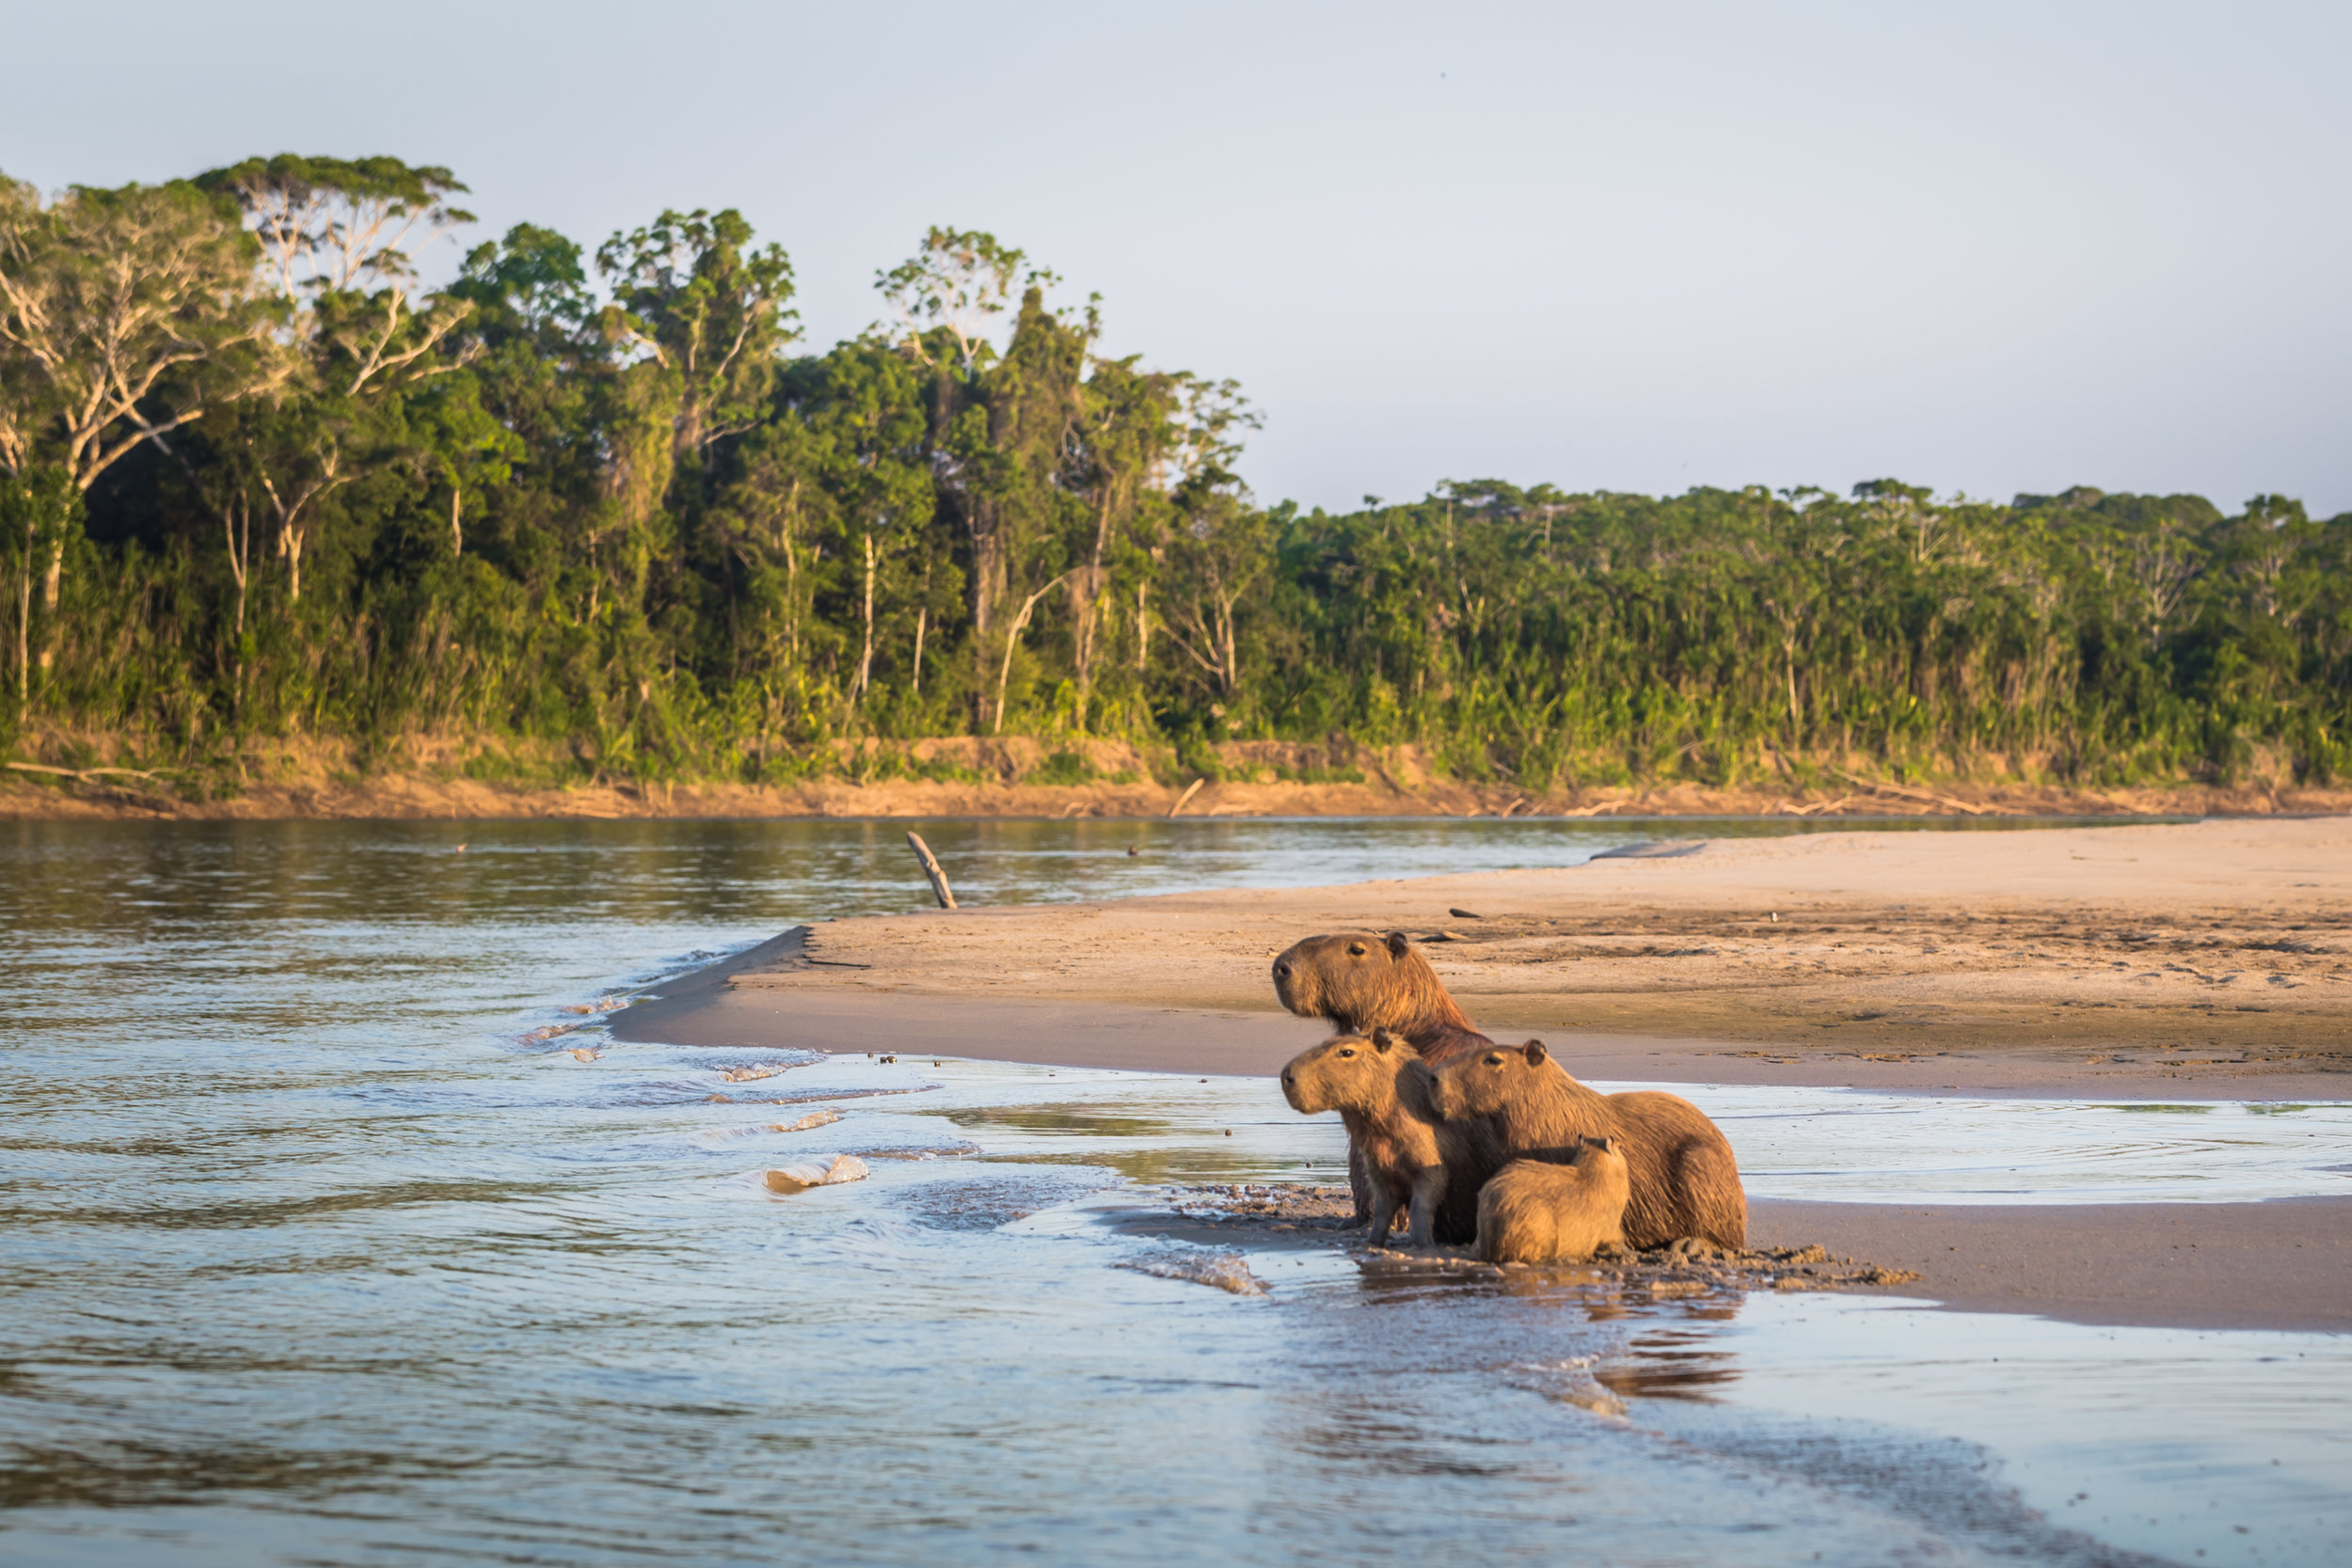 PICTURED: A family of capybaras along the Amazon River in Manu National Park, Peru.